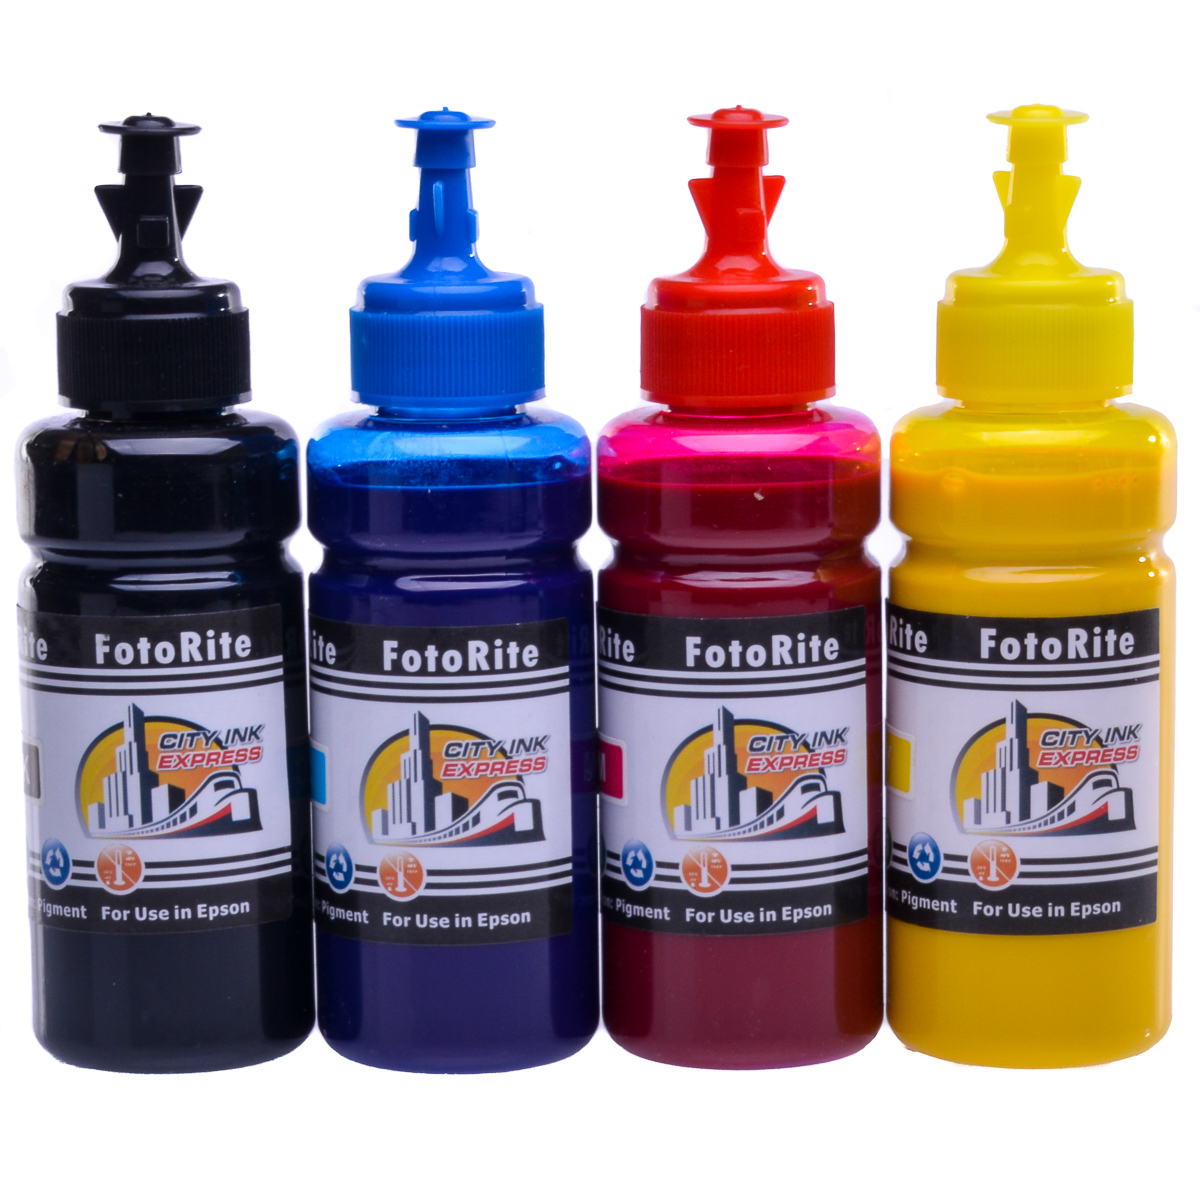 Cheap Multipack pigment ink refill replaces Epson L11160